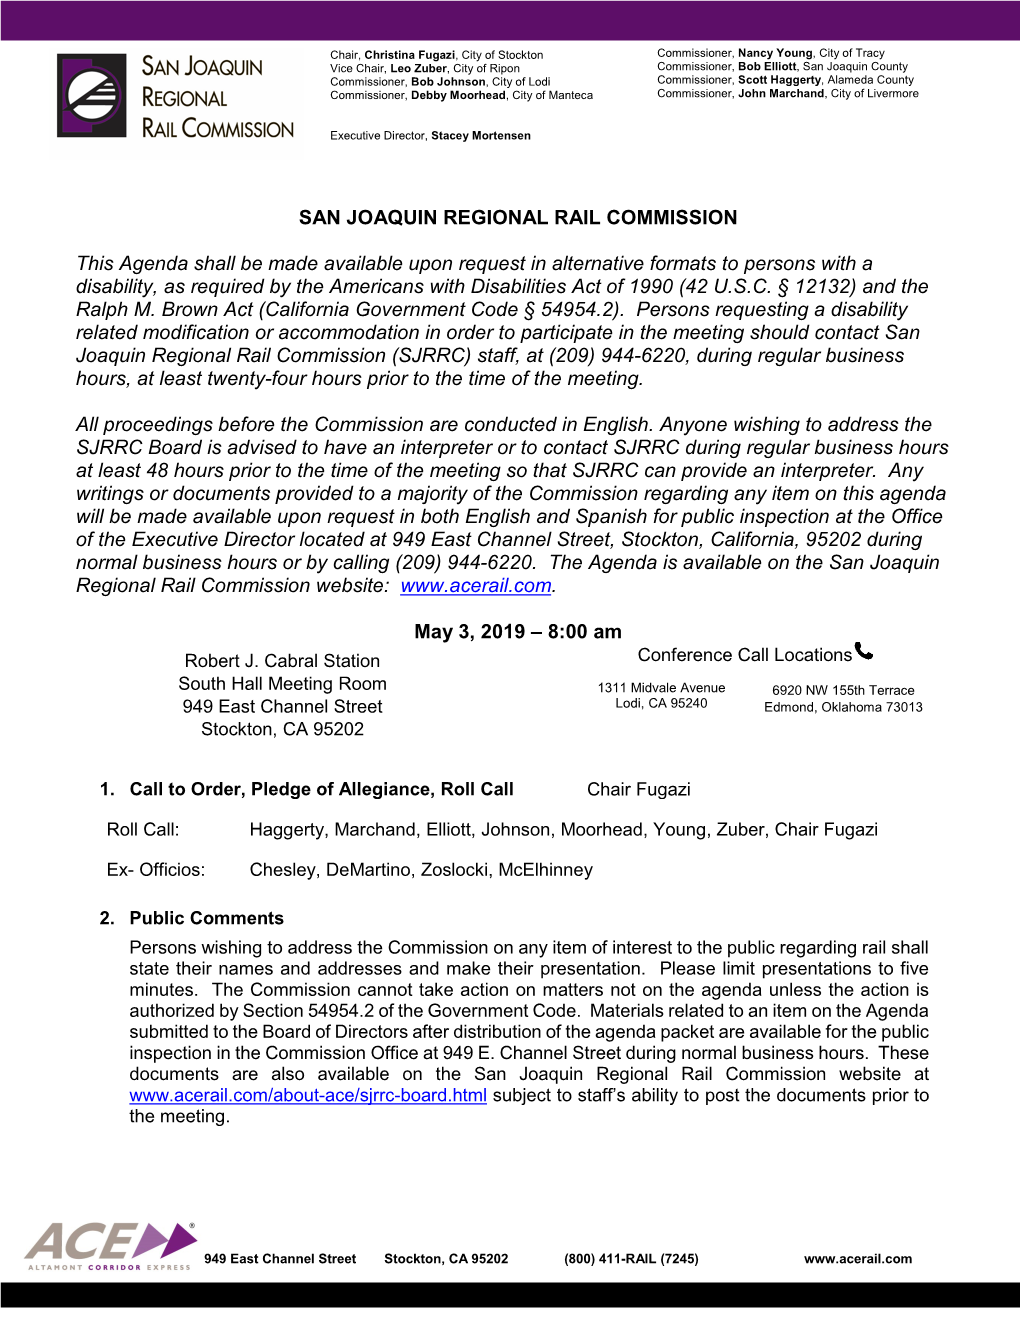 SAN JOAQUIN REGIONAL RAIL COMMISSION This Agenda Shall Be Made Available Upon Request in Alternative Formats to Persons with A